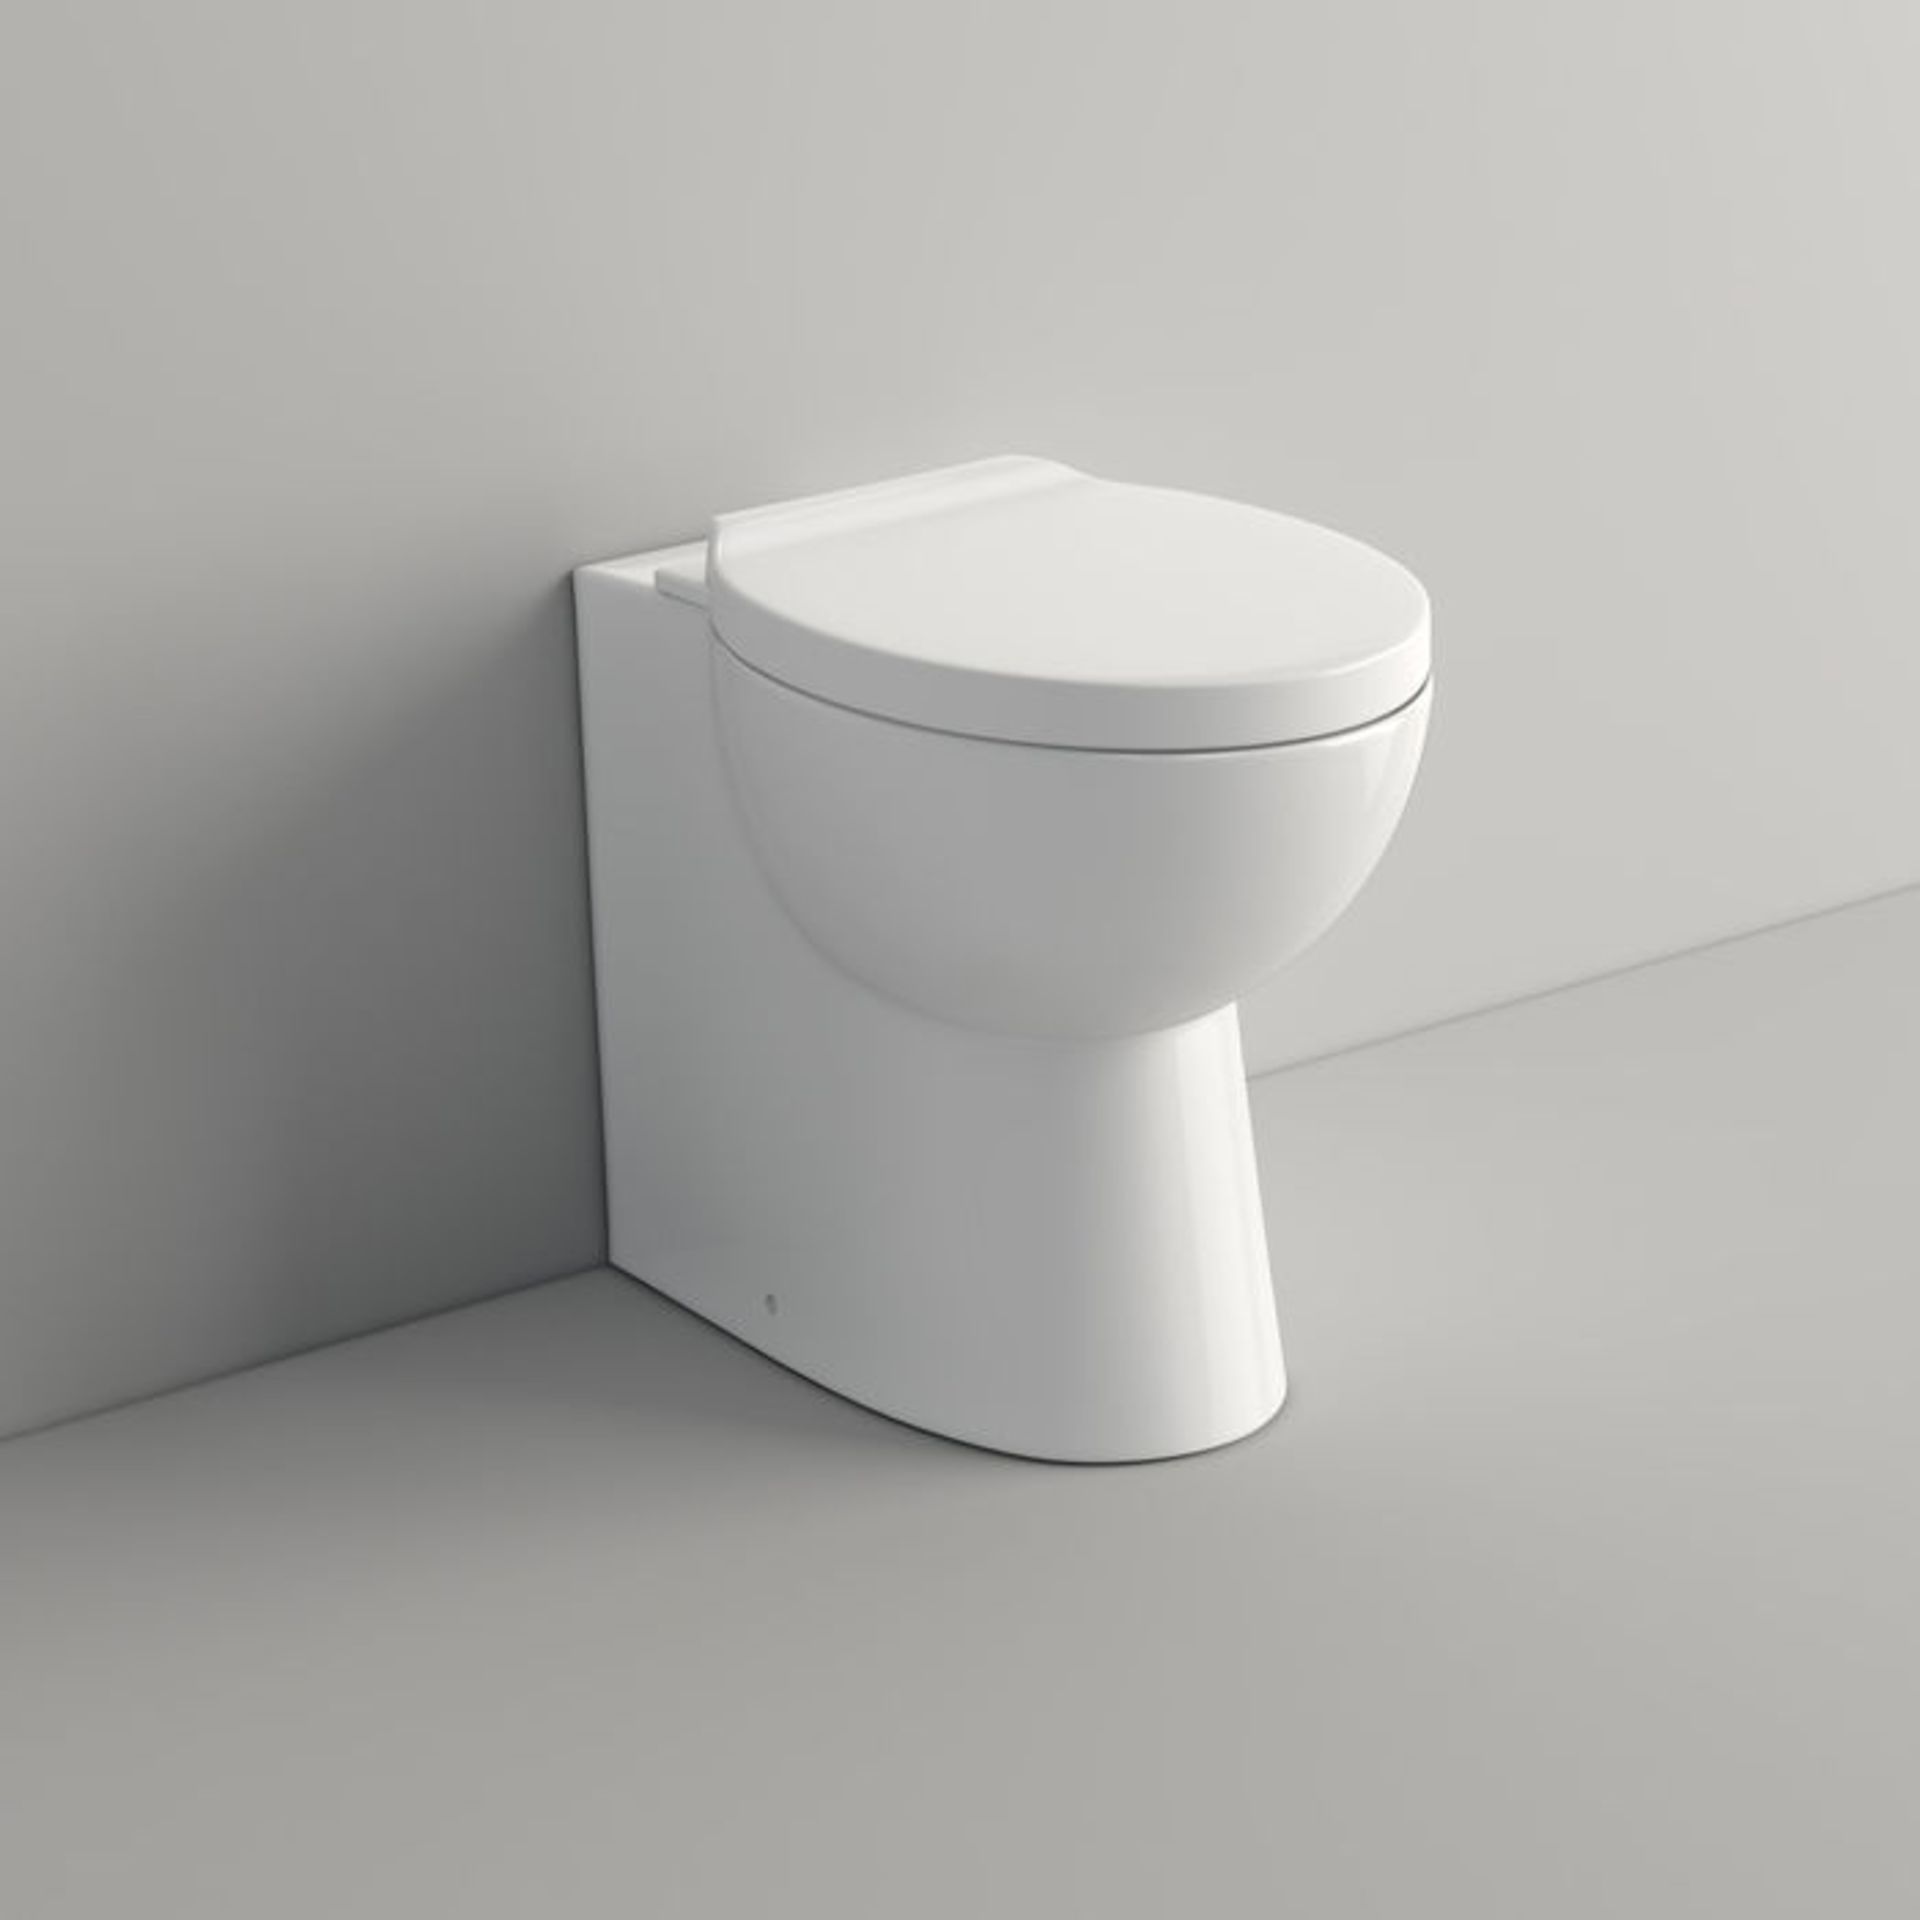 (SP47) Quartz Back to Wall Toilet inc Soft Close Seat Made from White Vitreous China Finished in a - Image 3 of 4